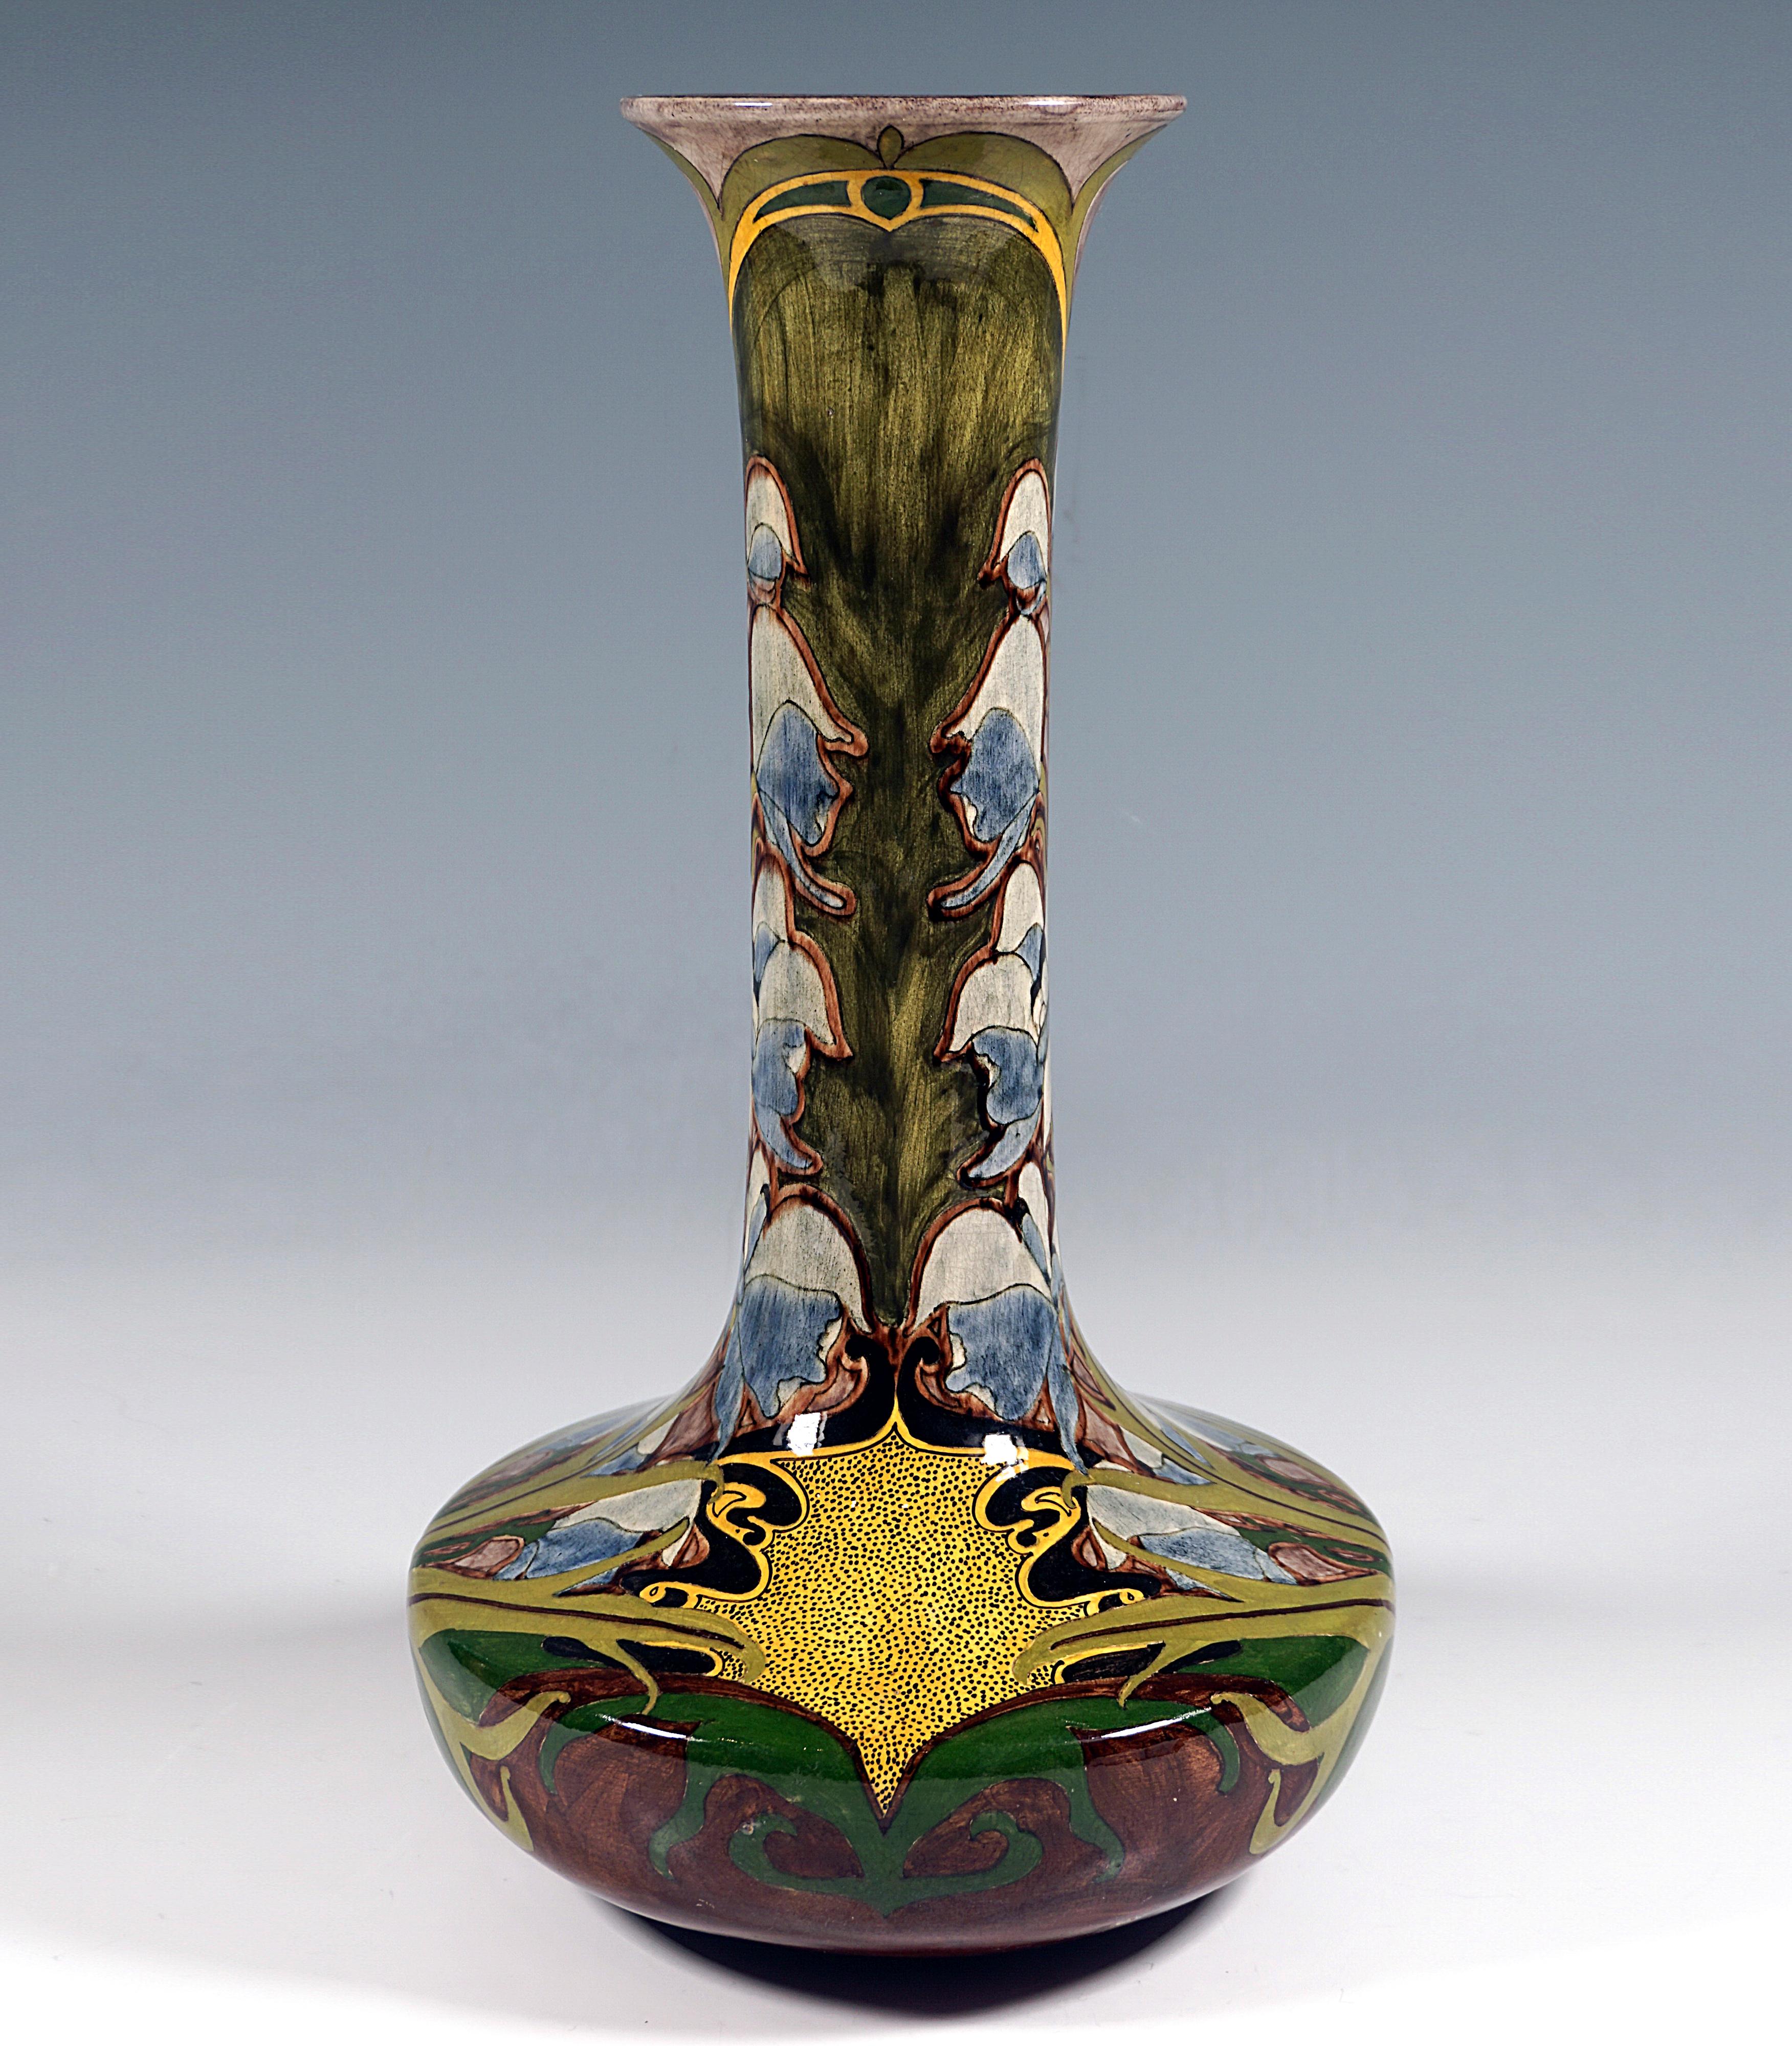 Excellent and decorative large faience long-necked vase, protruding bulbous body on a flush stand, tall cylindrical neck with flared mouth opening, largescale floral decoration in shades of green, brown and yellow with light blue aconite panicles,